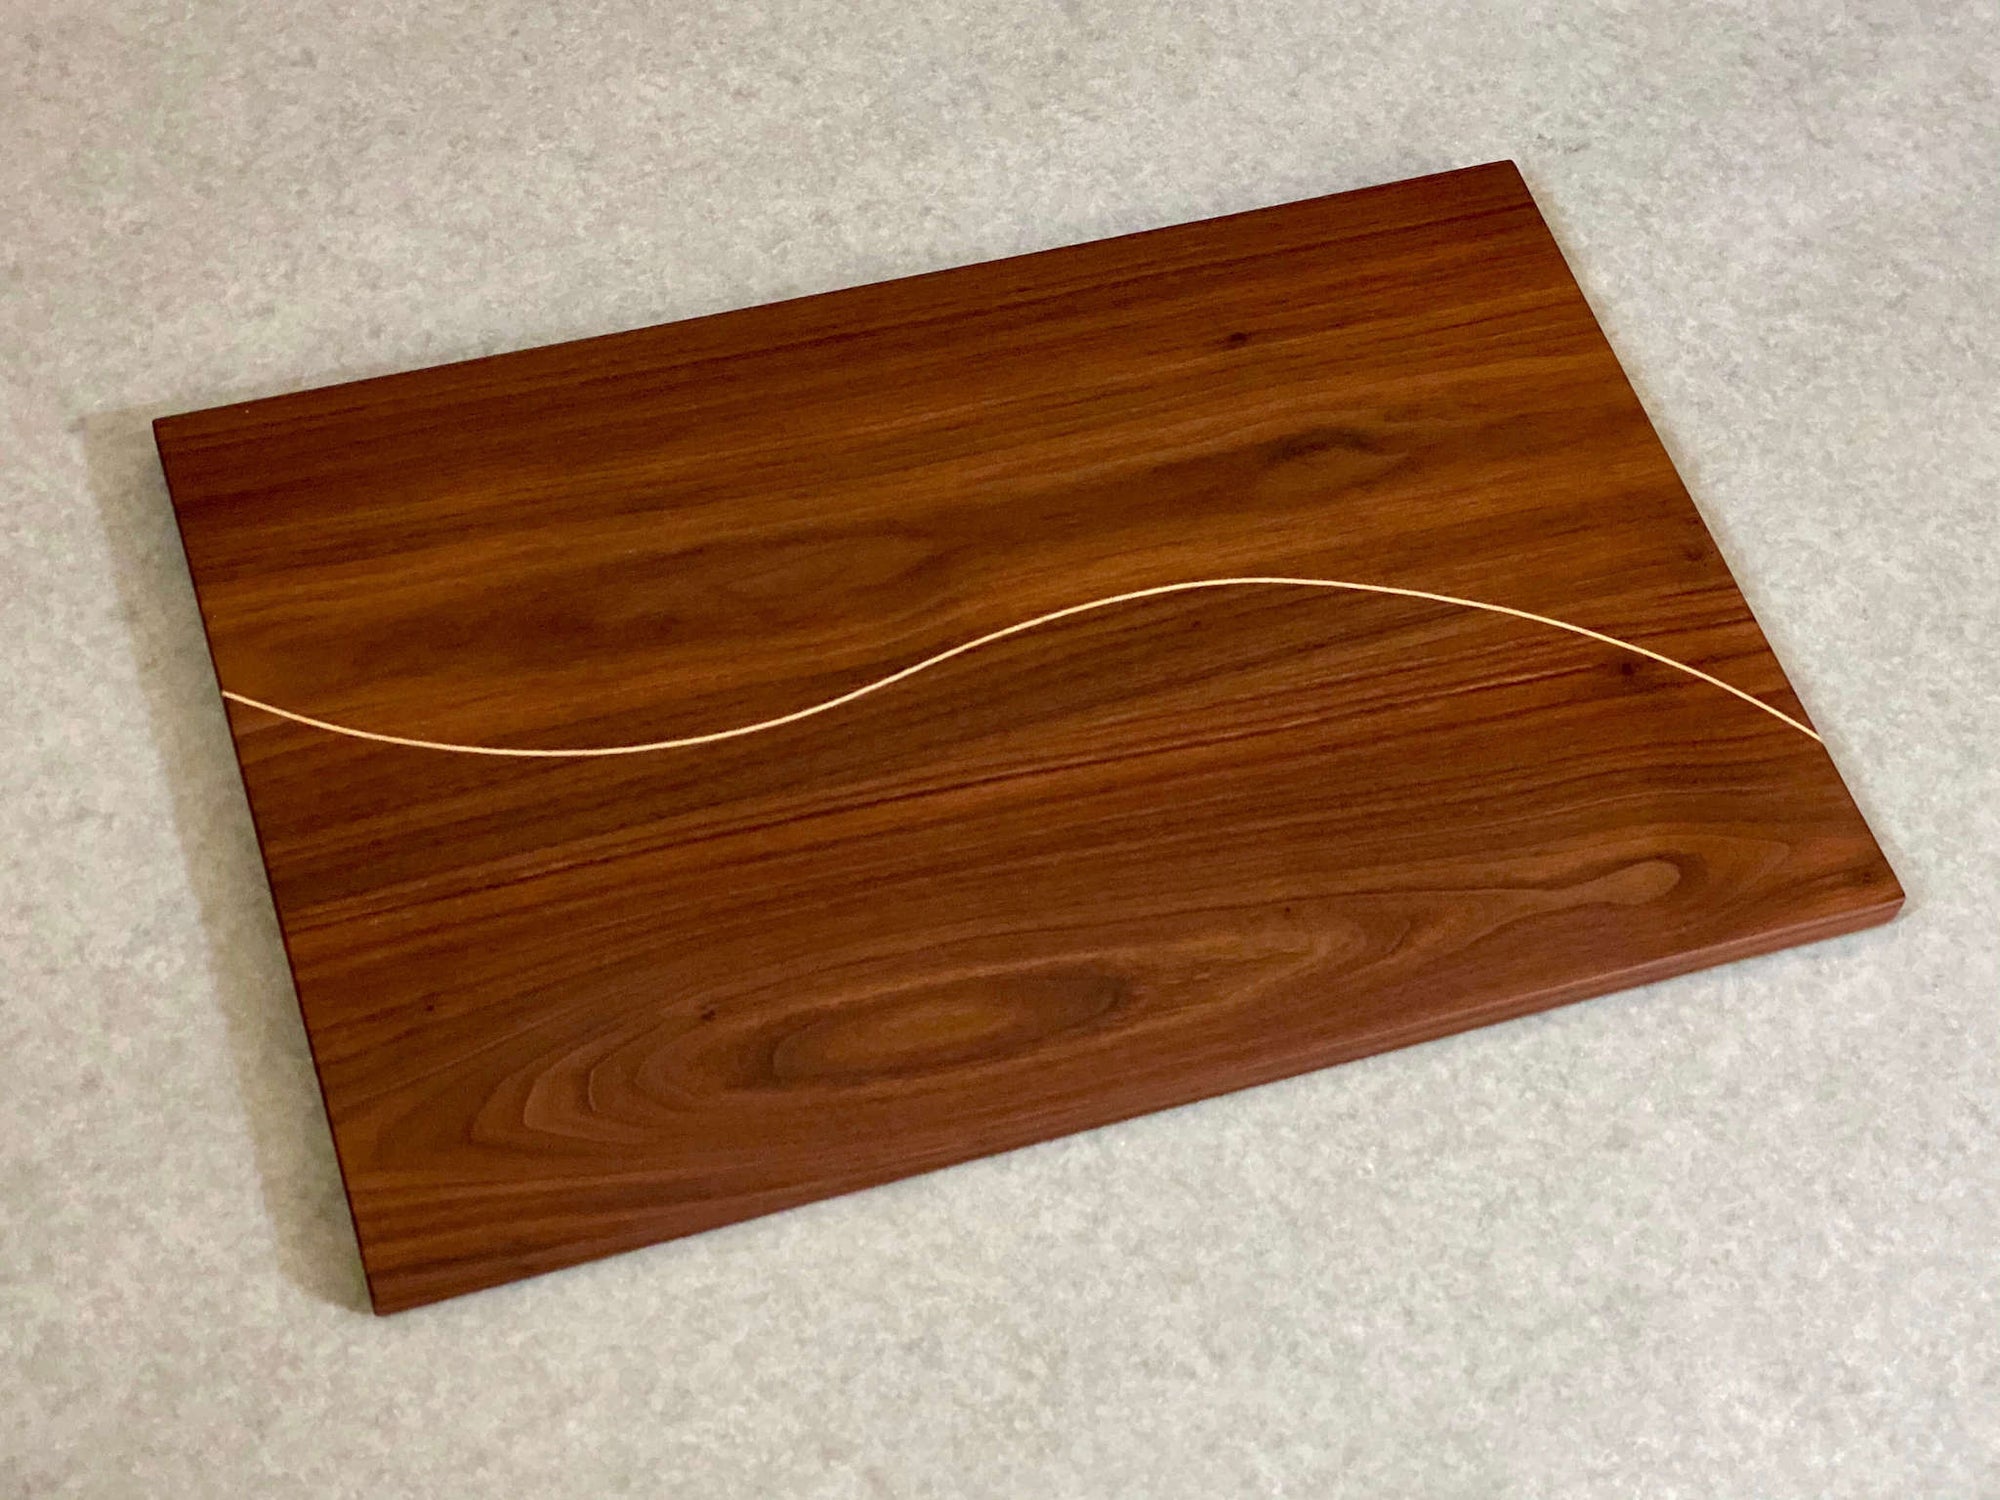 A rectangular cutting and serving board made of walnut with a thin line of maple curving down the center.